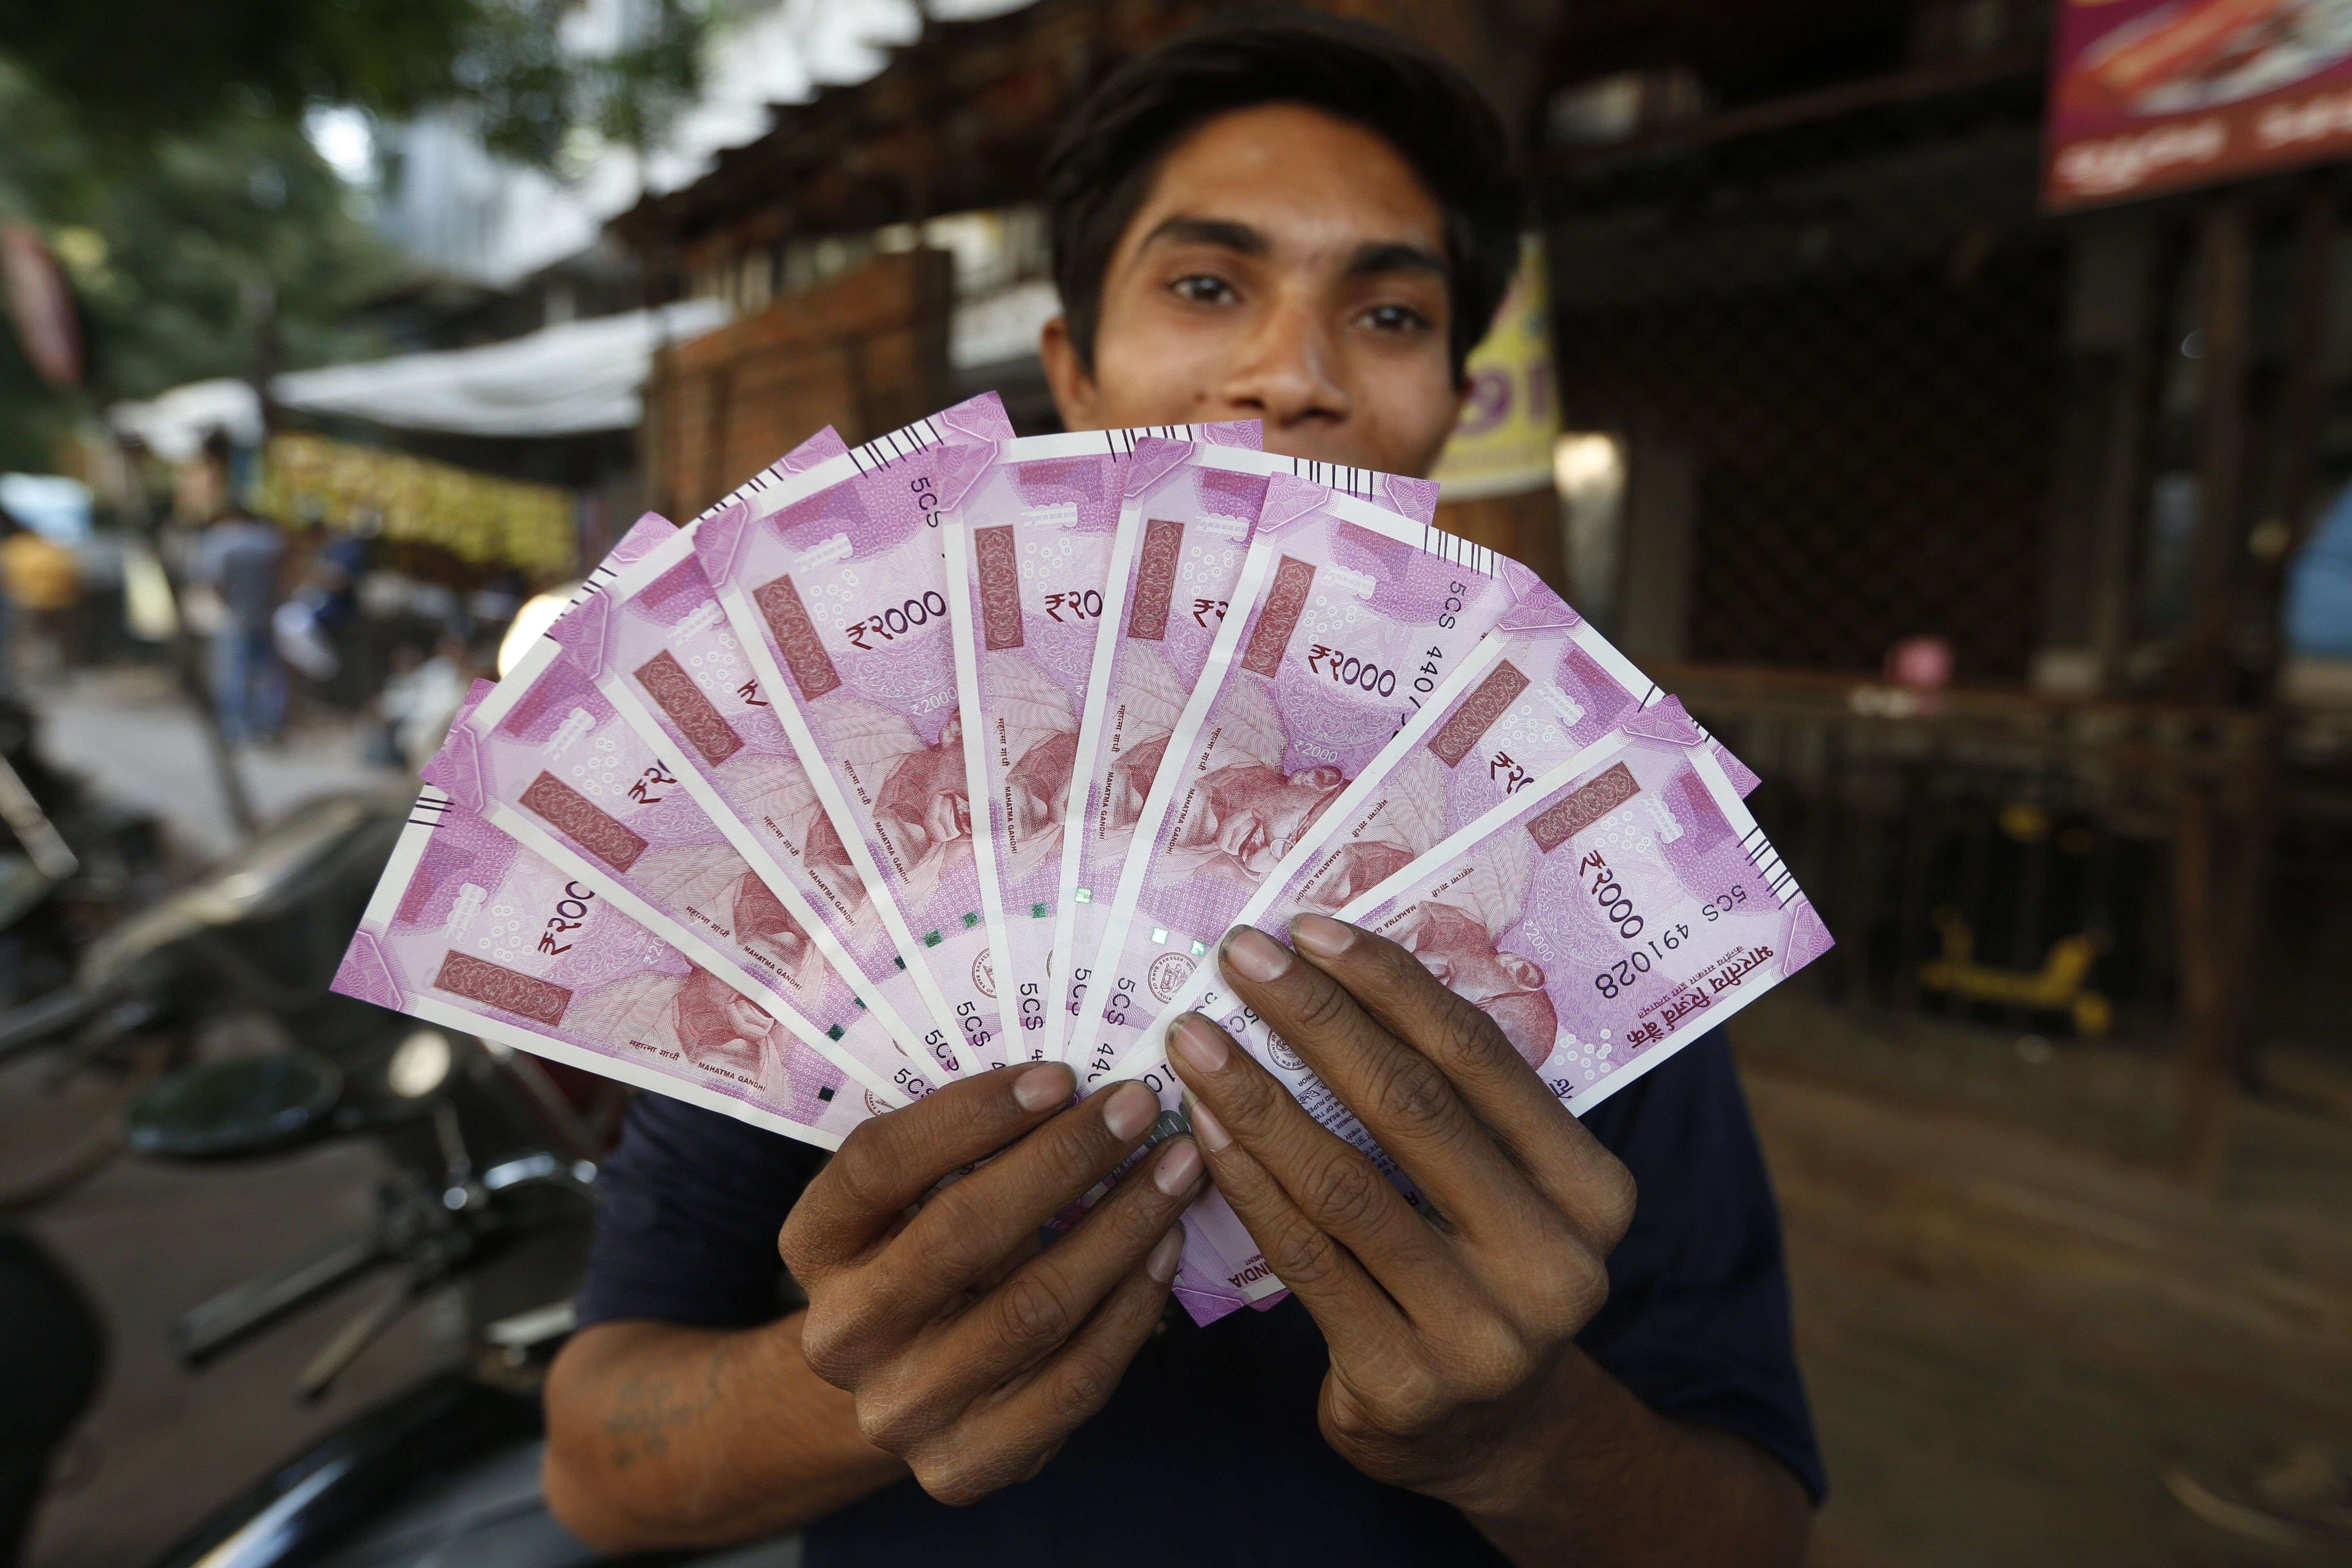 FILE - In this Nov. 11, 2016 file photo, an Indian man displays new currency notes of 2000 Indian rupee in Ahmadabad, India. The sudden withdrawal of 86 percent of India's currency has left cash in short supply, retail sales stumbling and wholesale markets in turmoil. (AP Photo/Ajit Solanki, File)